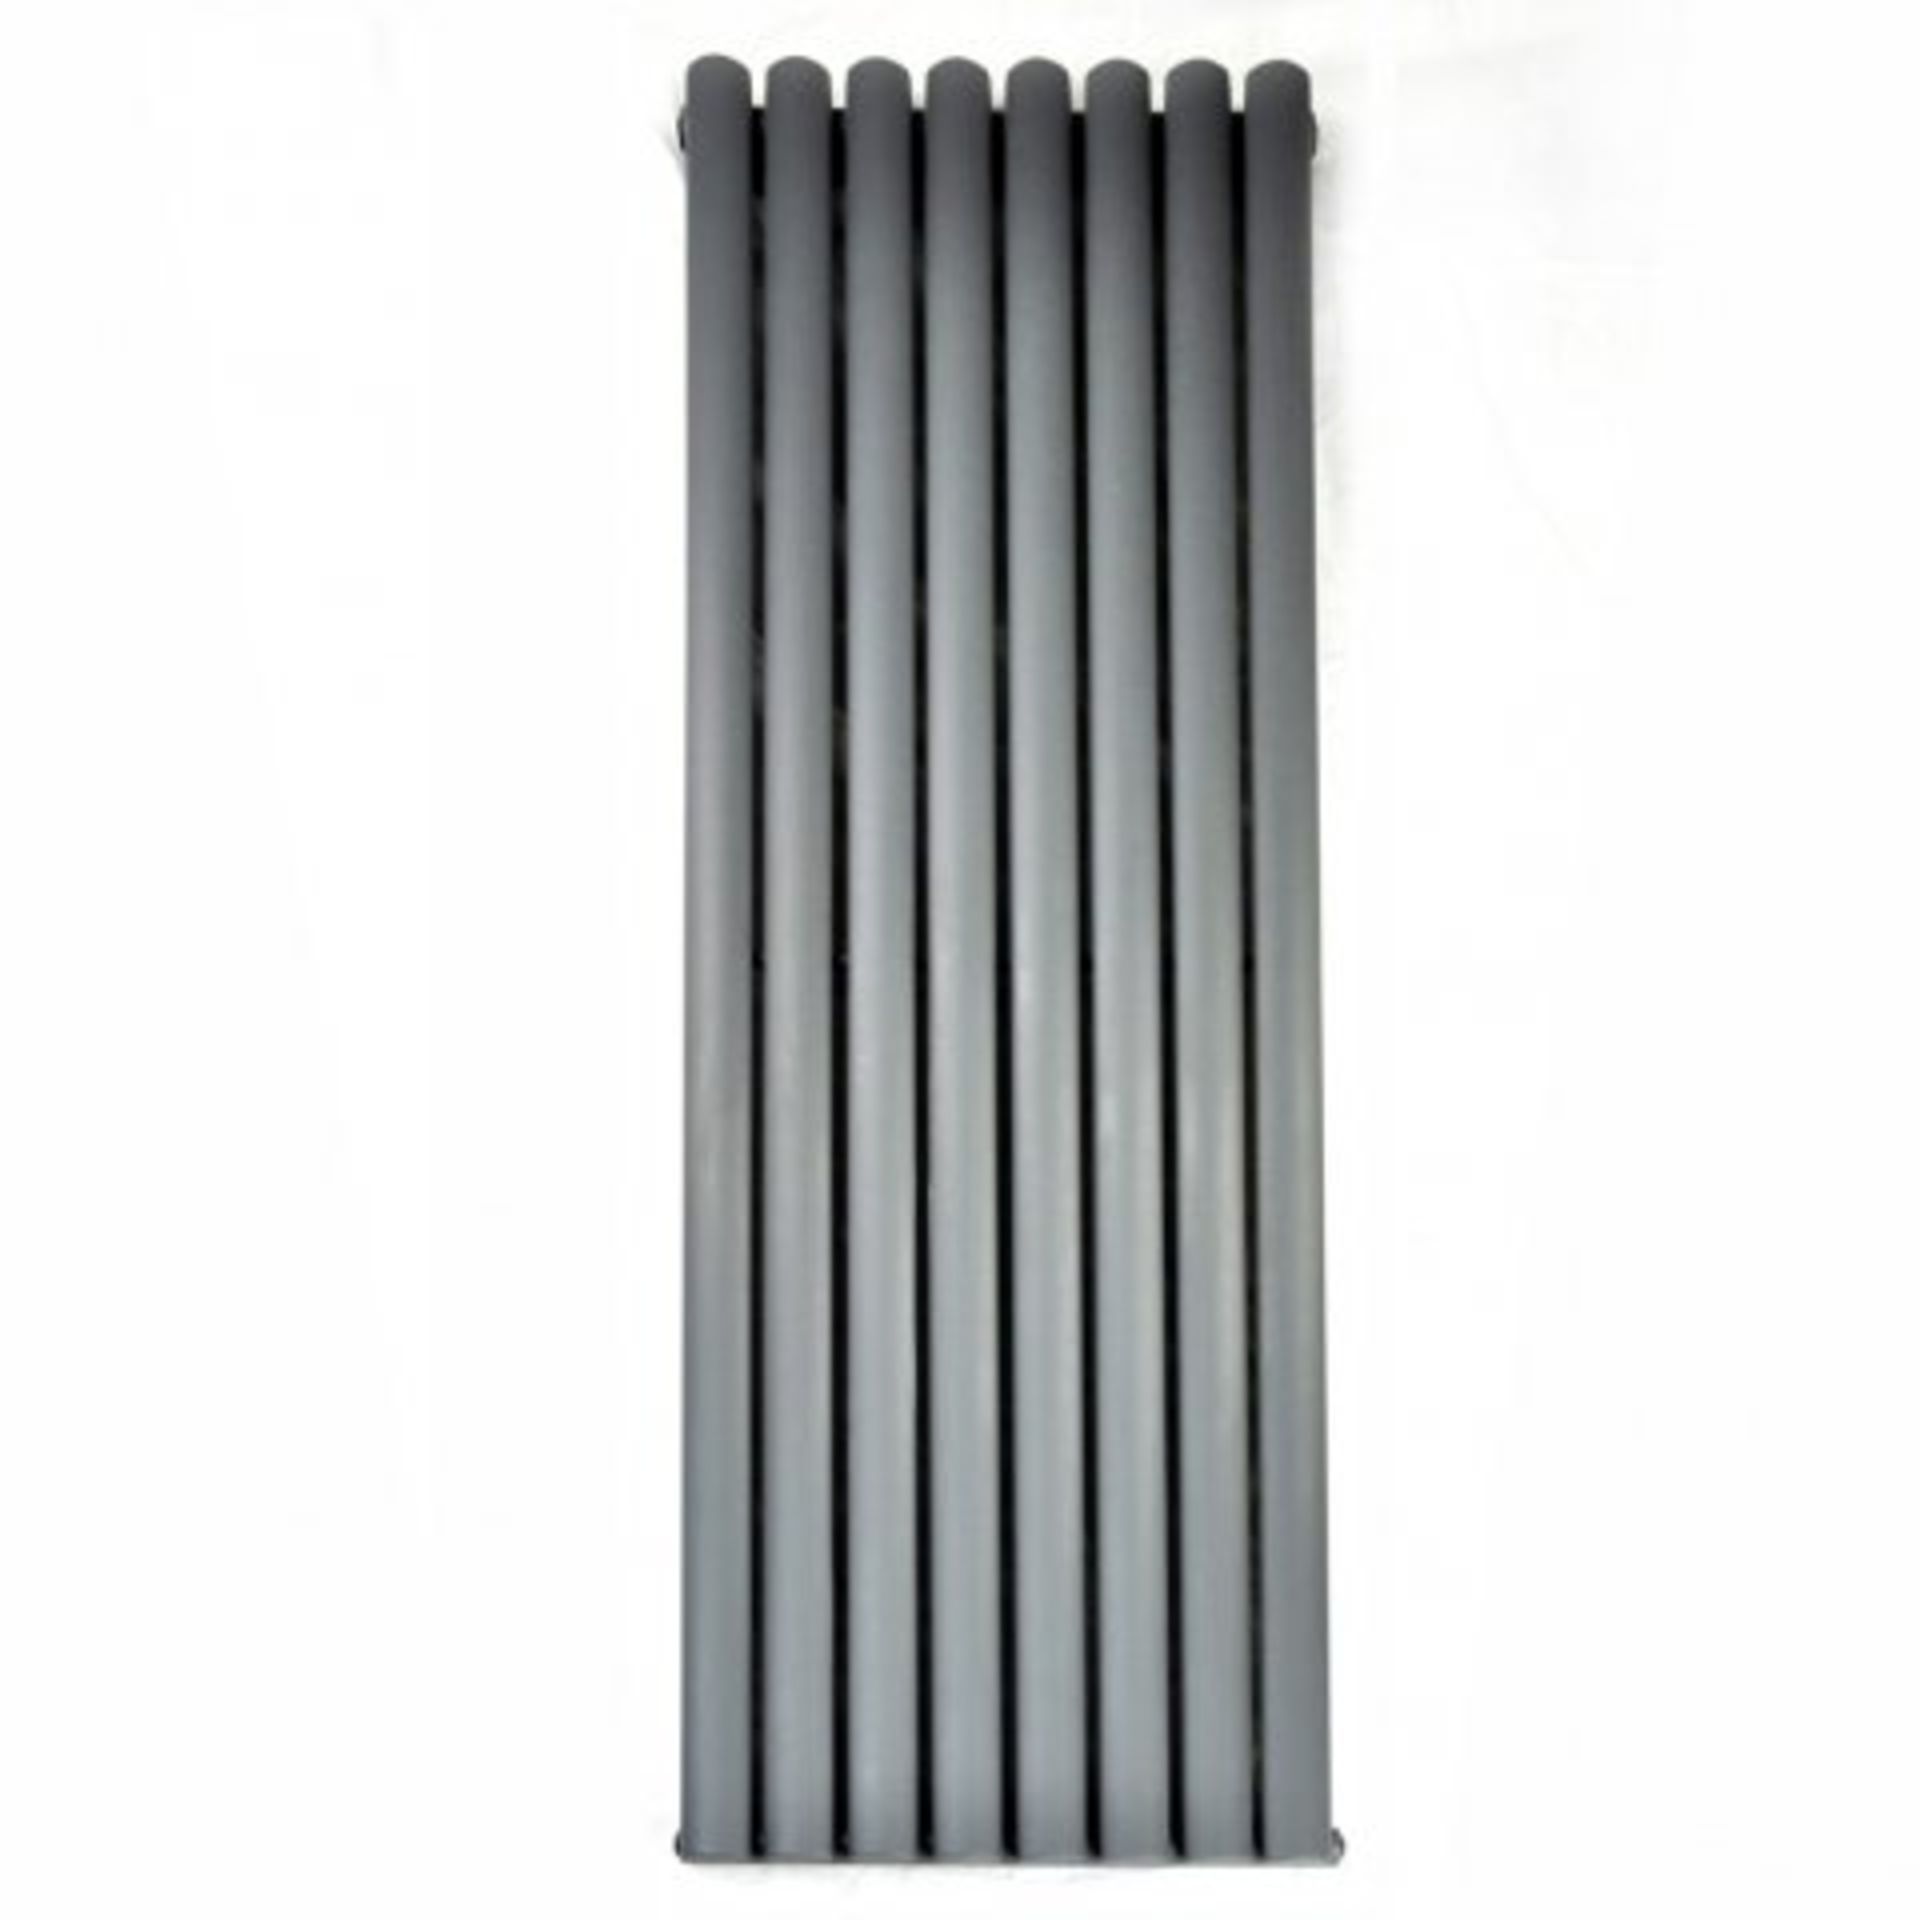 (A39) 1600x480mm Anthracite Single Oval Tube Vertical Radiator - Ember Premium. RRP £199.99. - Image 3 of 5